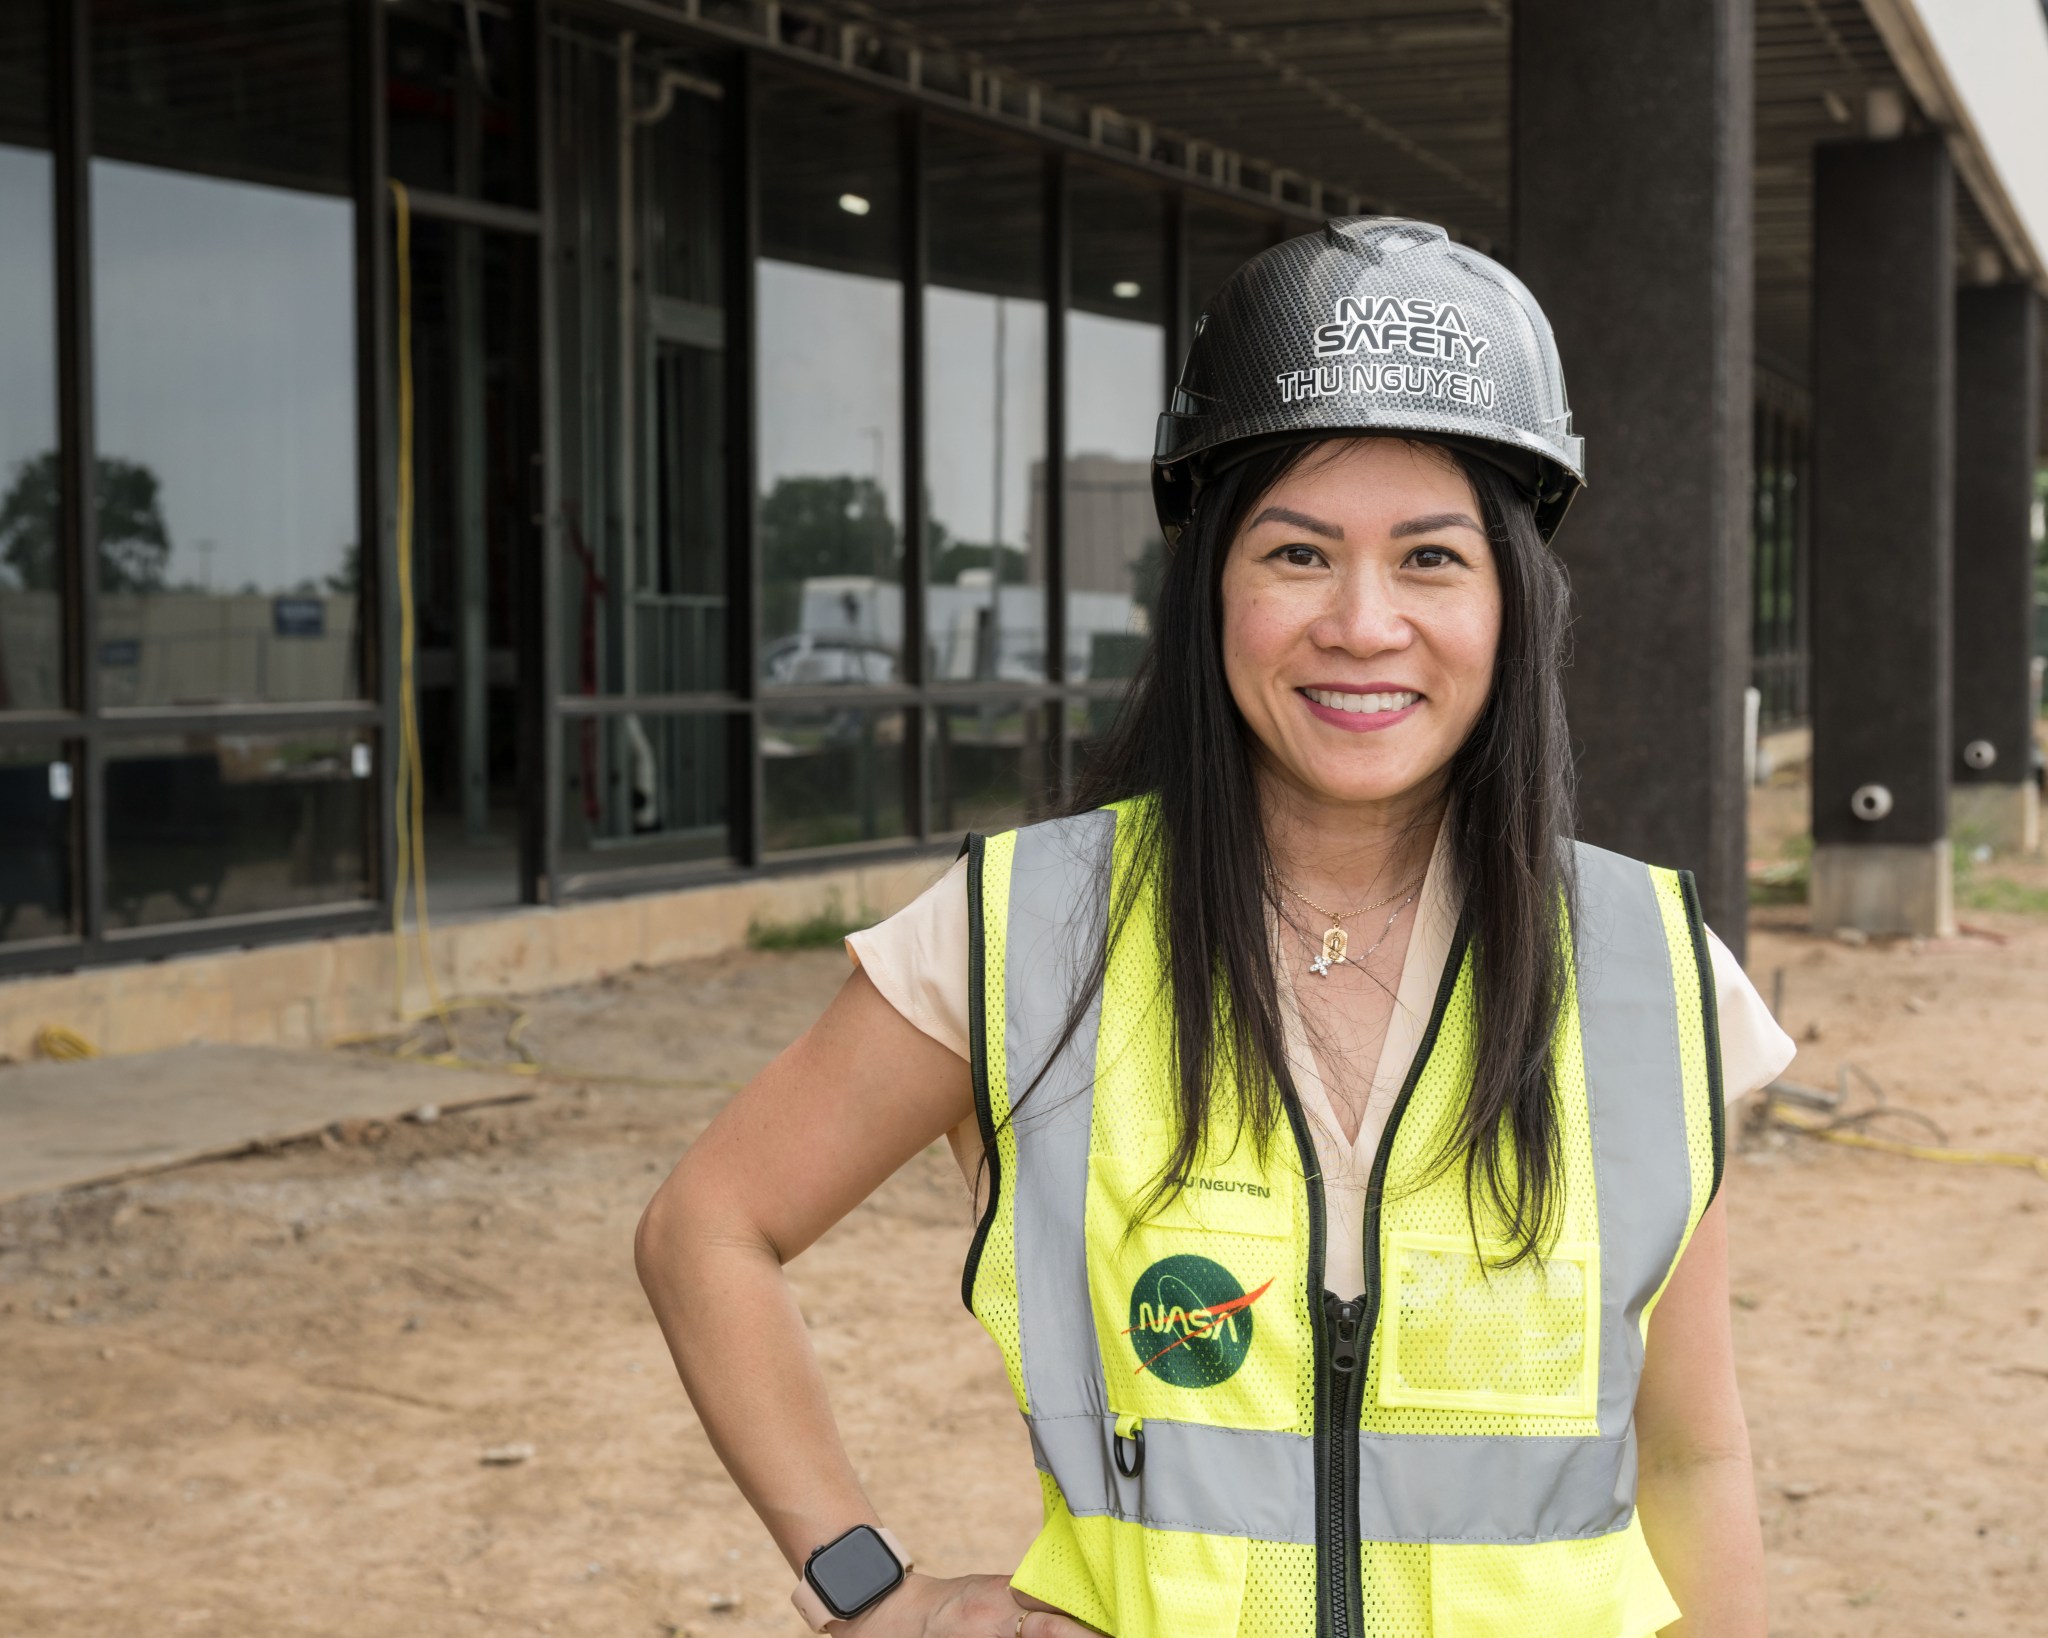 Fall Protection Program Administrator Thu Nguyen poses for a portrait wearing a yellow vest and hard hat outside Building 31x, a construction site at NASA's Johnson Space Center.